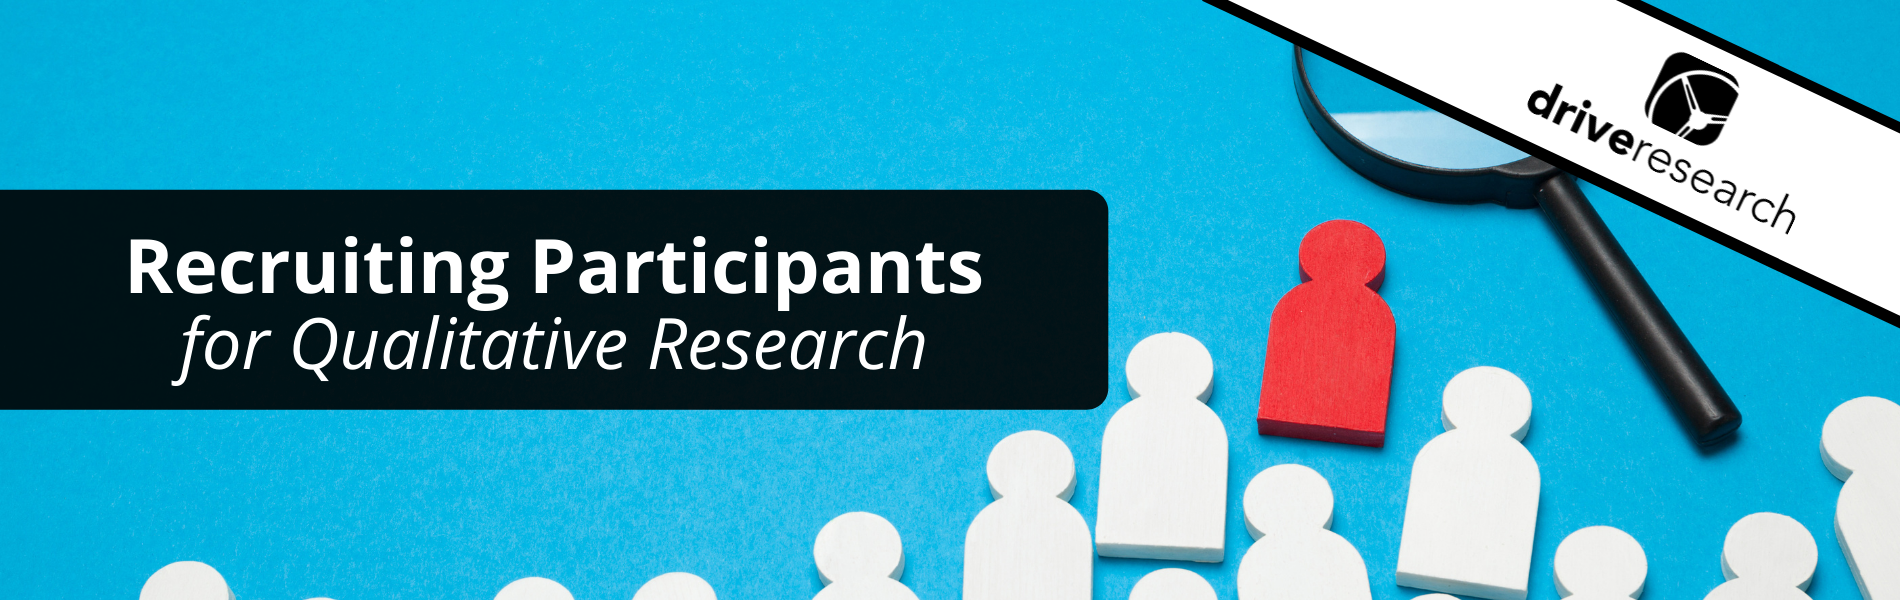 Recruiting Participants for Qualitative Research